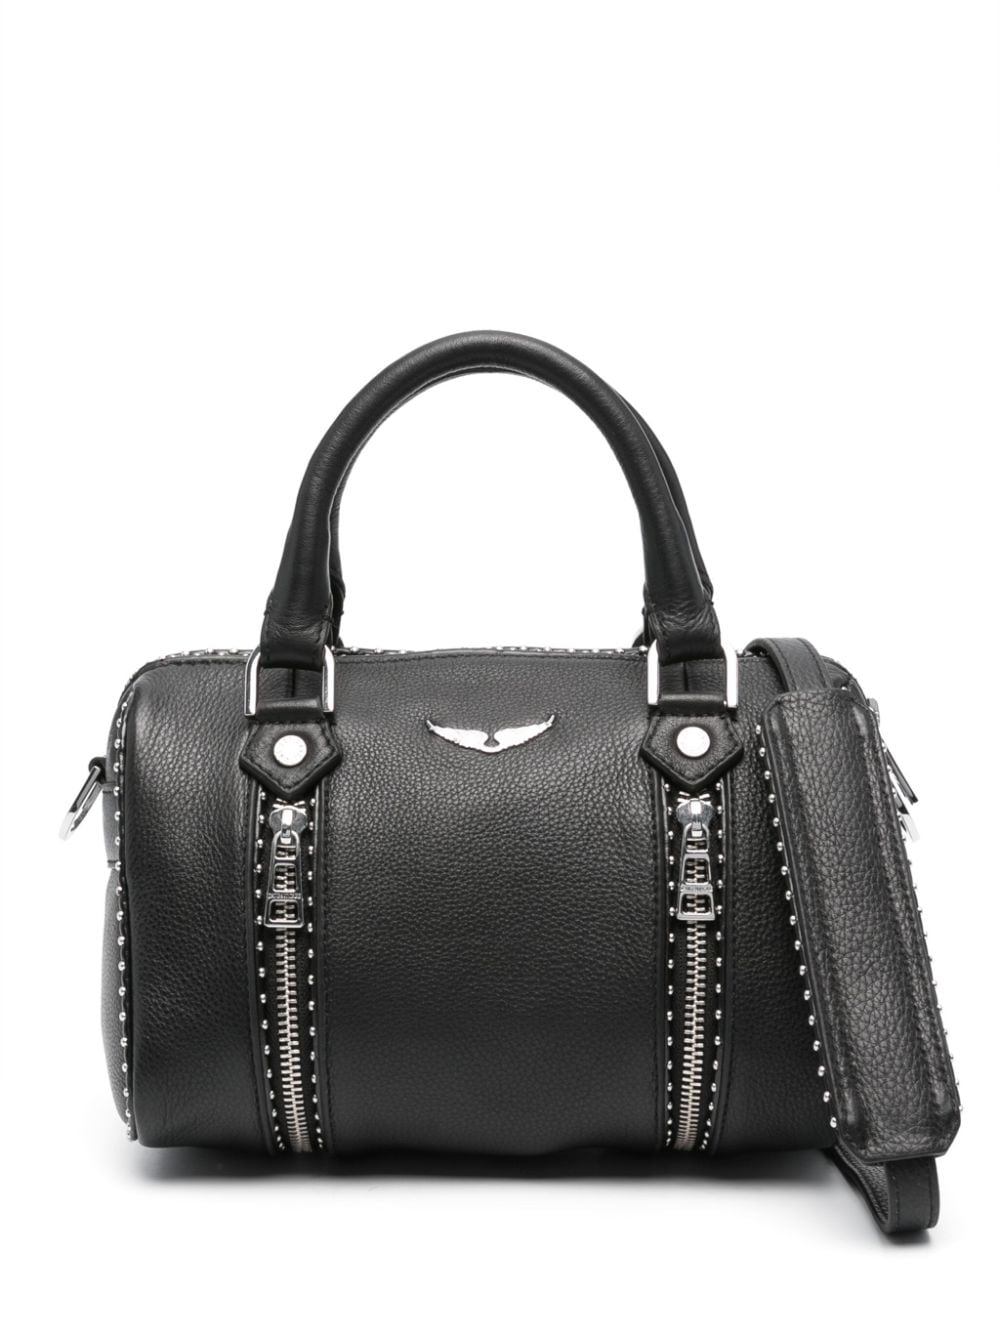 Zadig&Voltaire small logo leather tote bag - Black